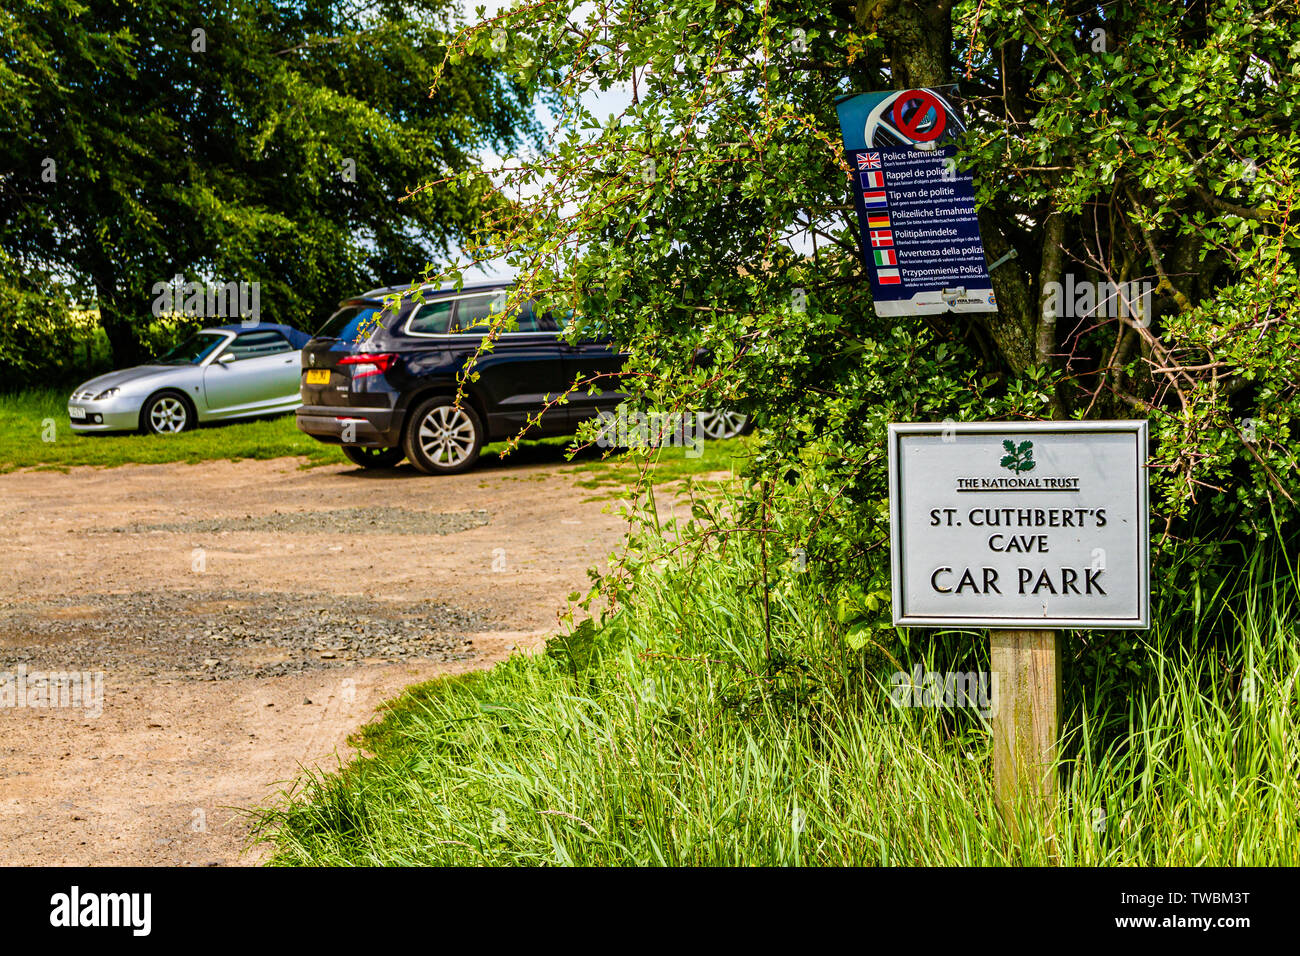 The car park for St Cuthberts Cave, a popular site near Holburn, Northumberland, UK. June 2019. Stock Photo